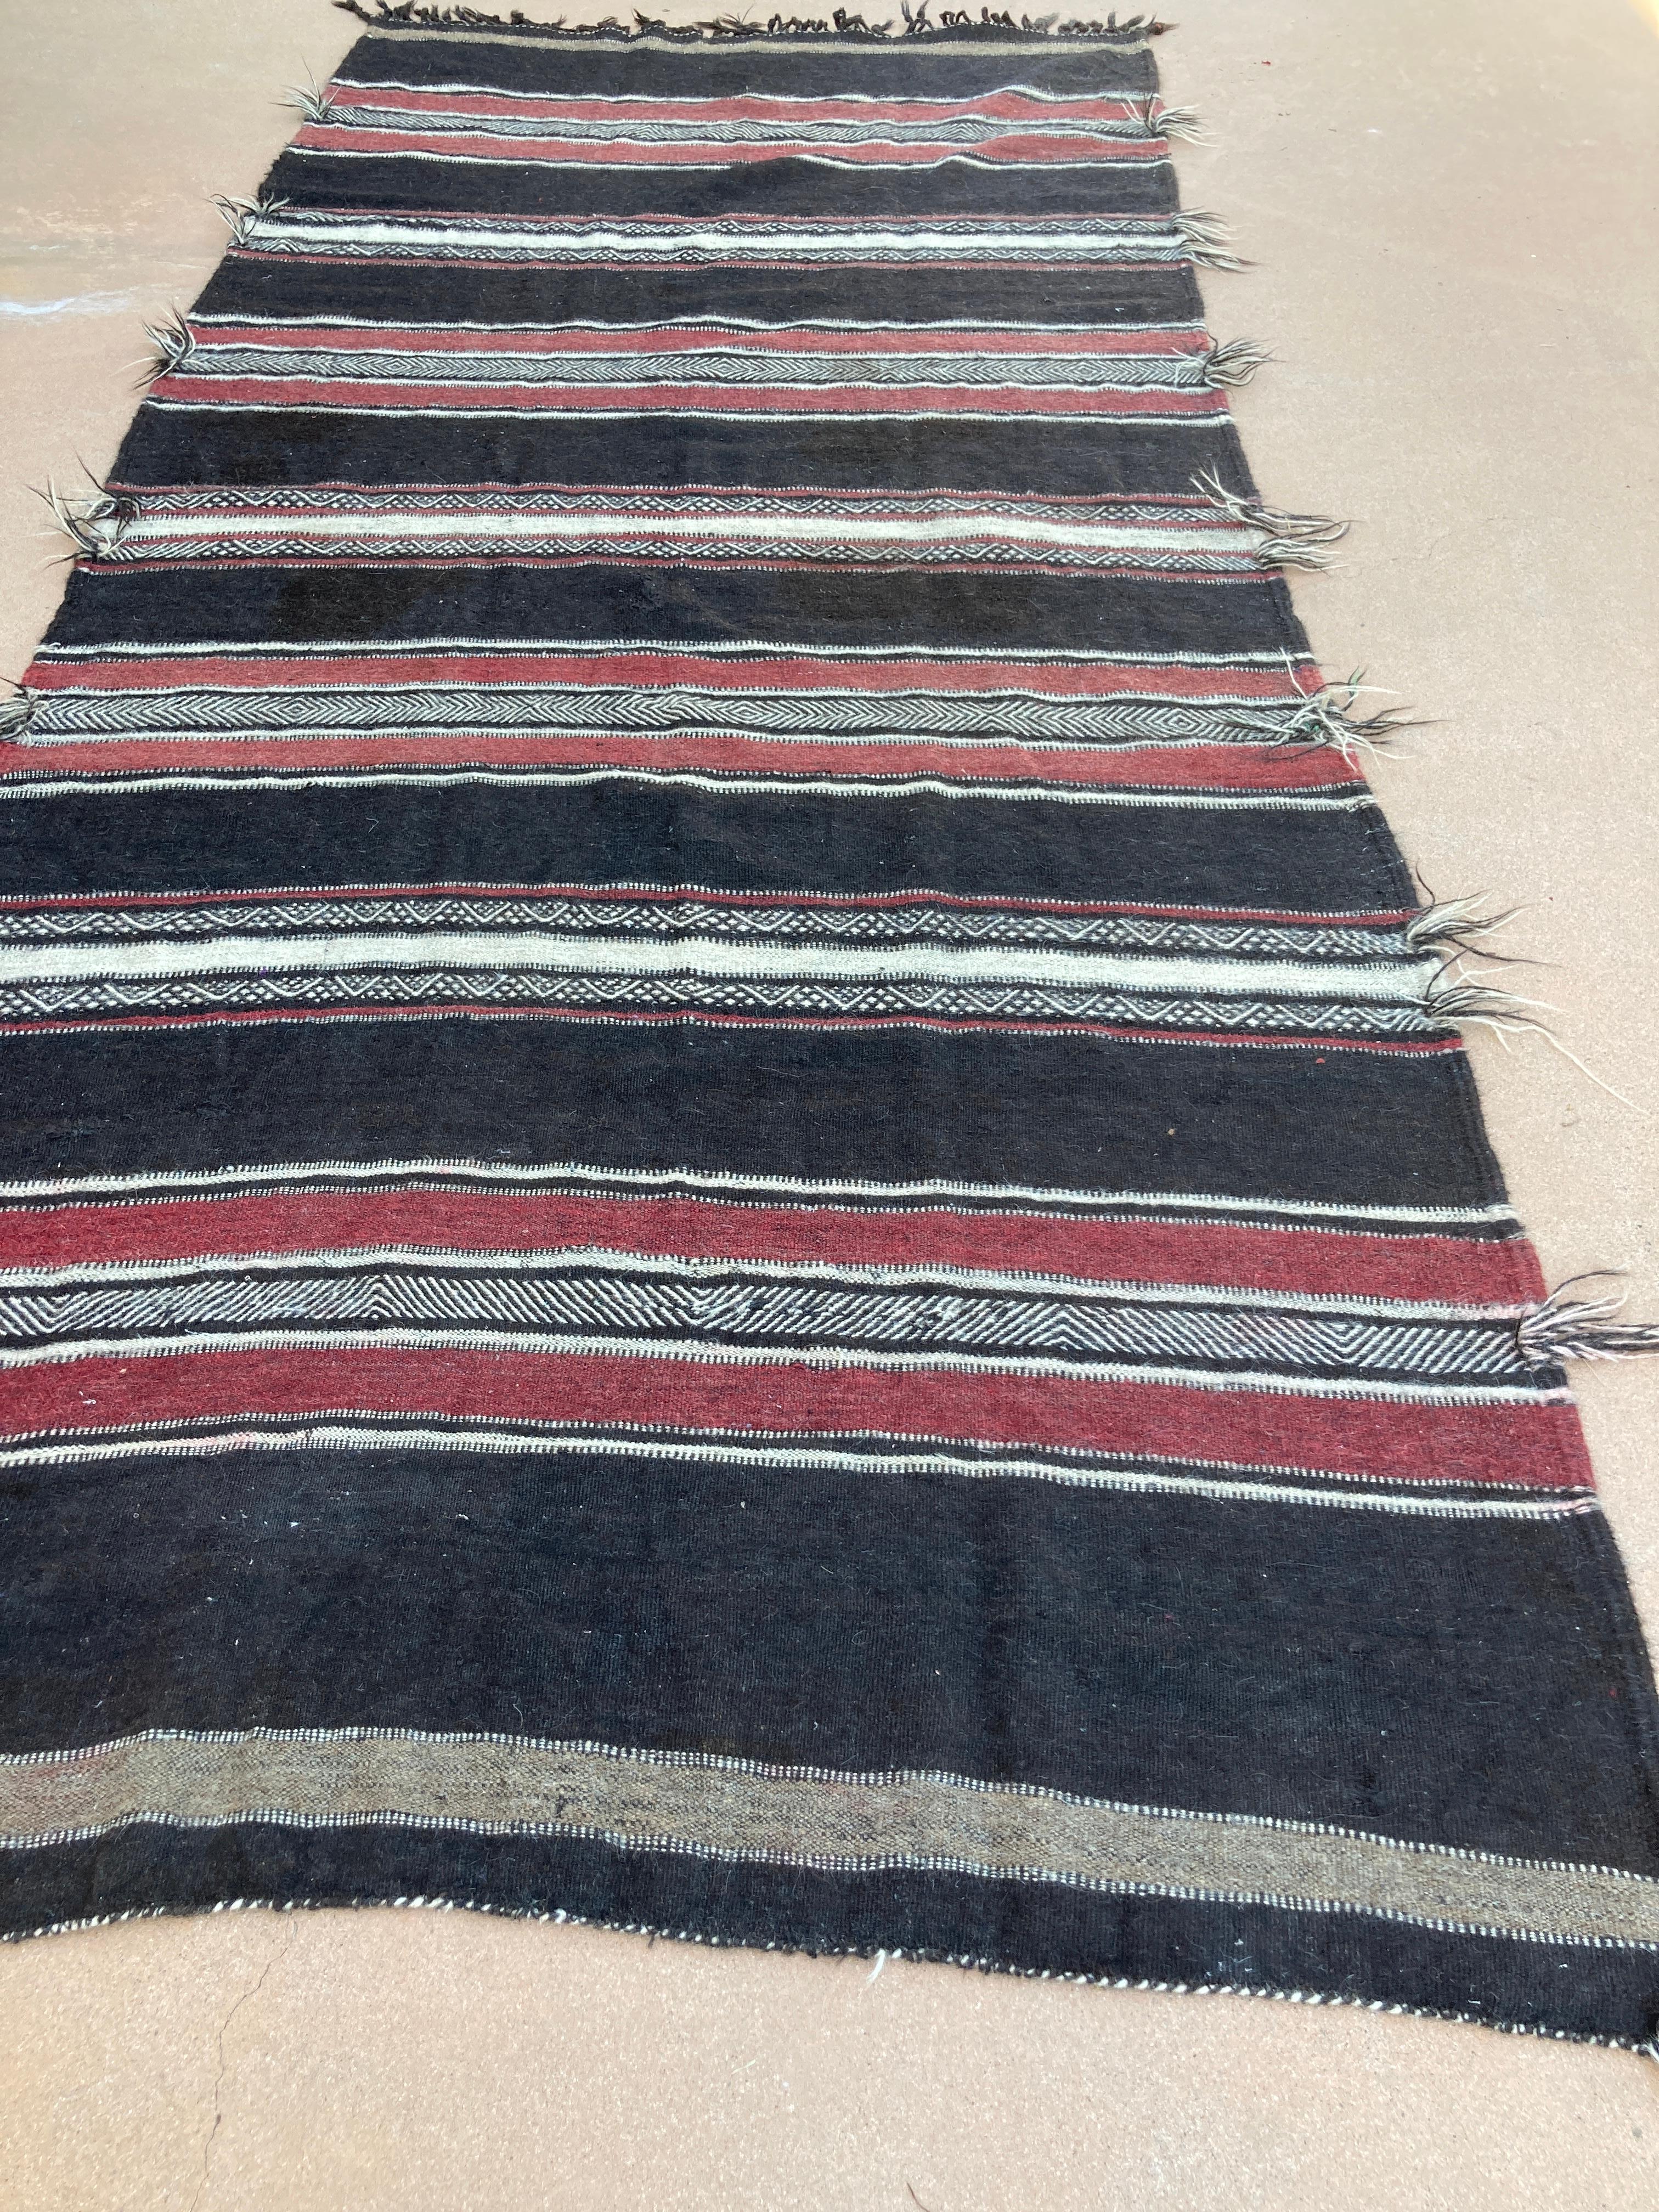 Hand-Woven Moroccan Vintage Flat-Weave Black Camel Hair Tribal Rug For Sale